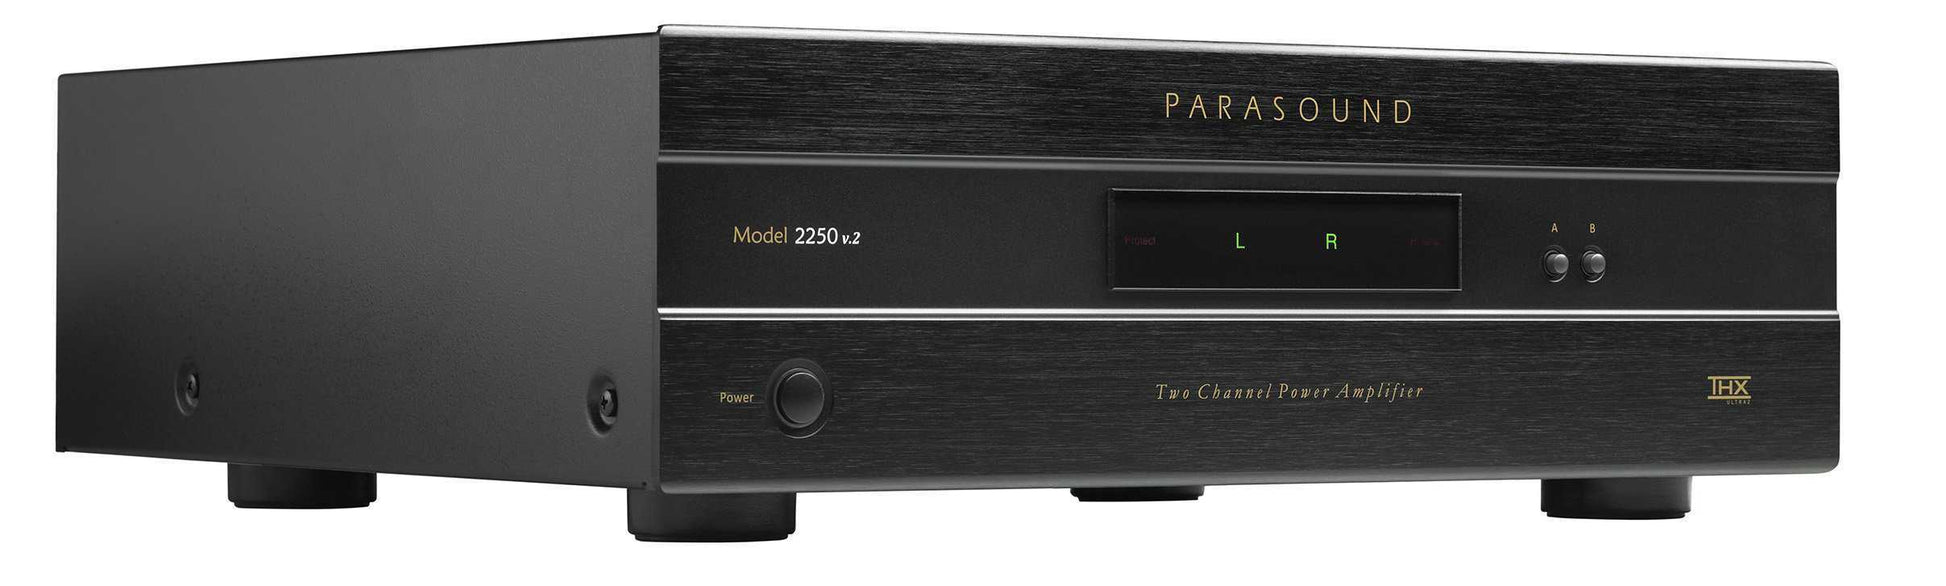 Parasound 2250 v.2 Two Channel Power Amplifier (8527650423132)